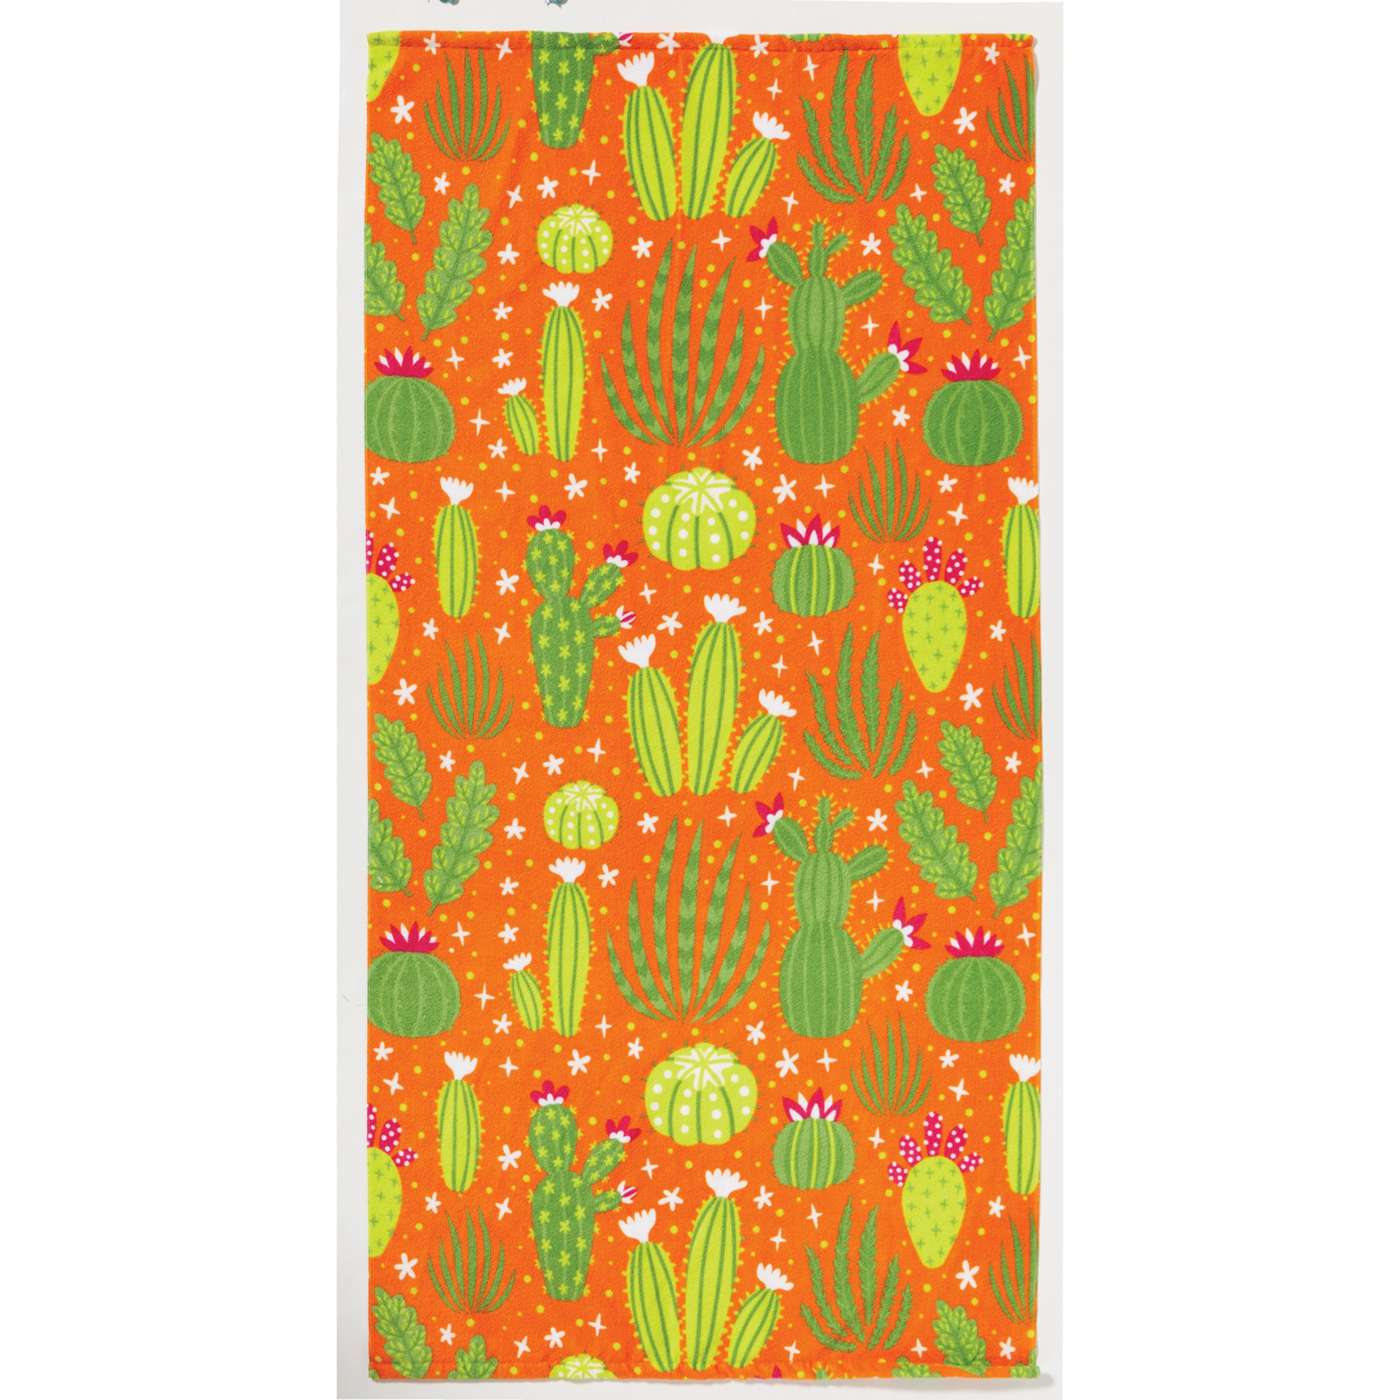 Destination Holiday All Over Succulent Beach Towel; image 1 of 2